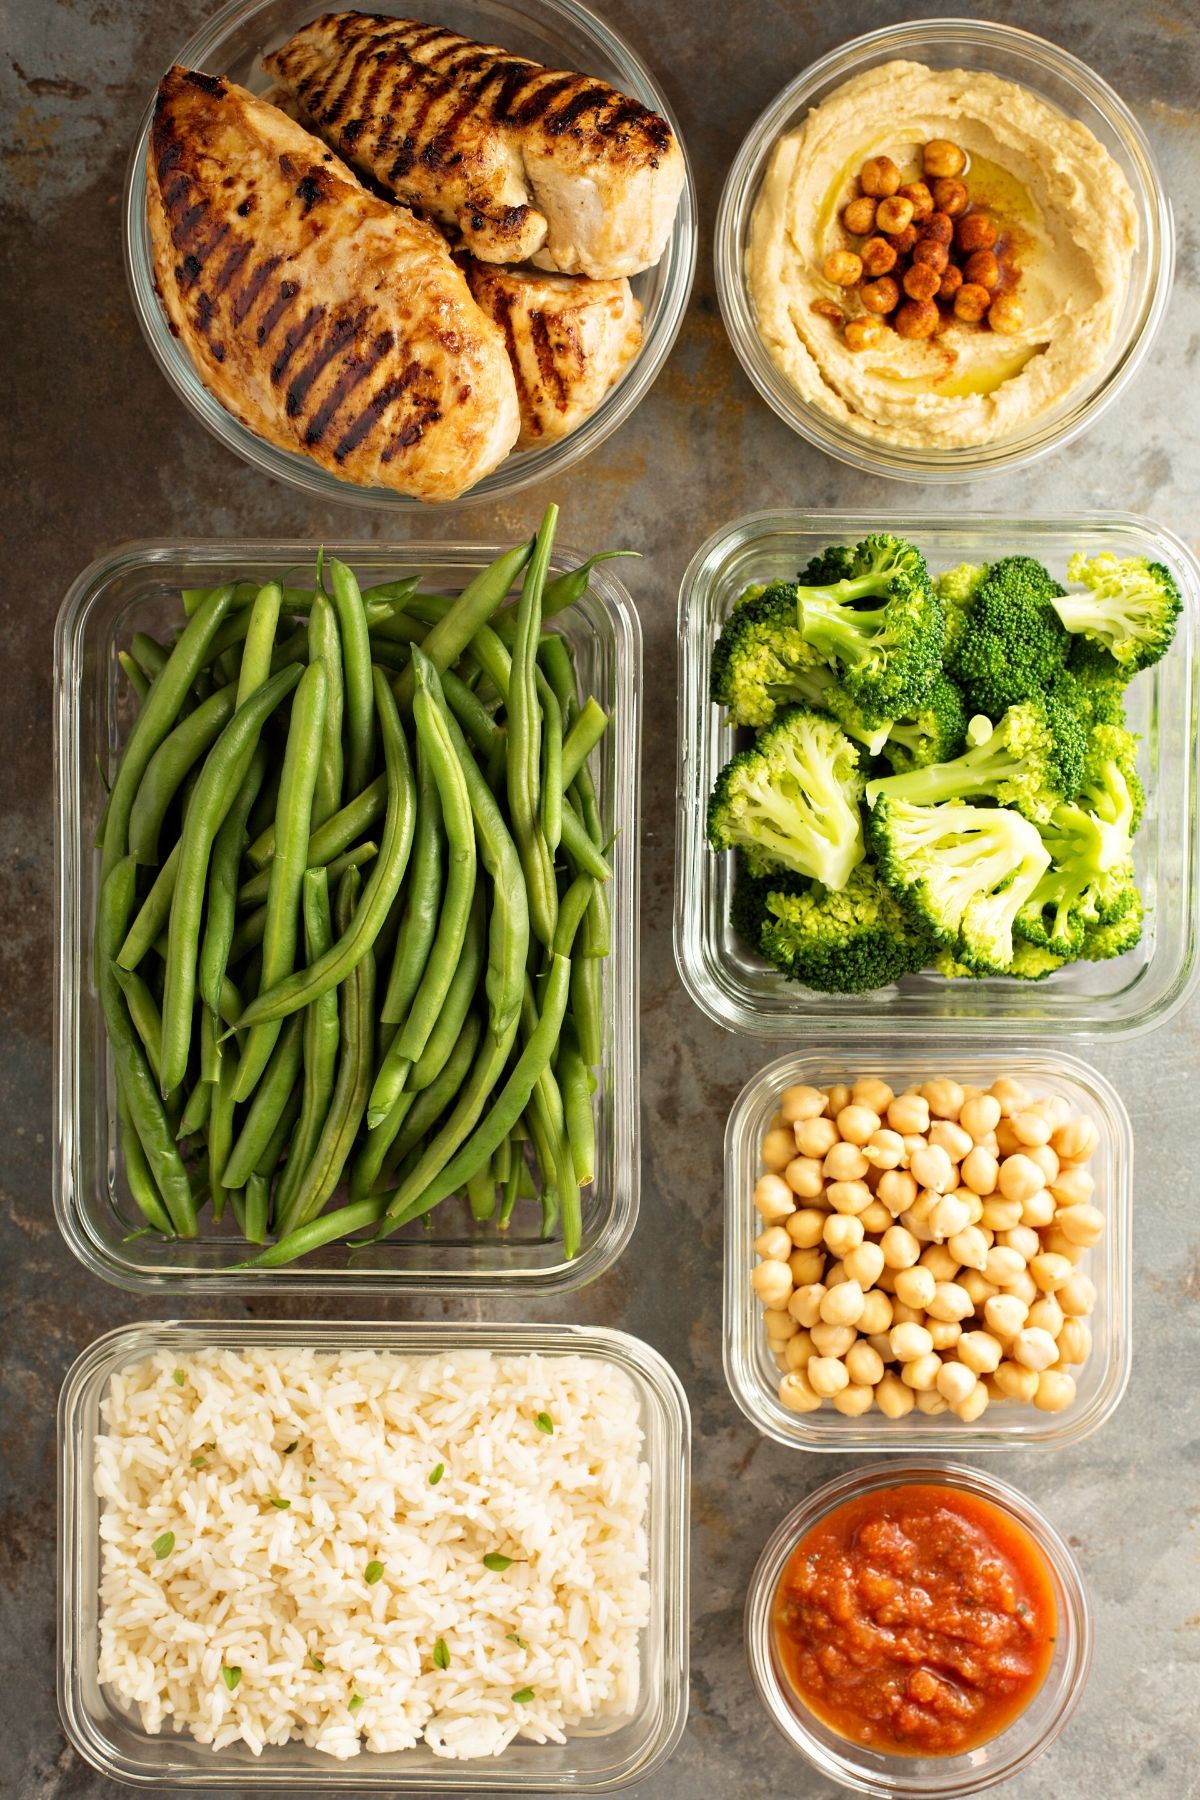 75+ Easy & Healthy Budget Meal Prep Ideas - The Girl on Bloor